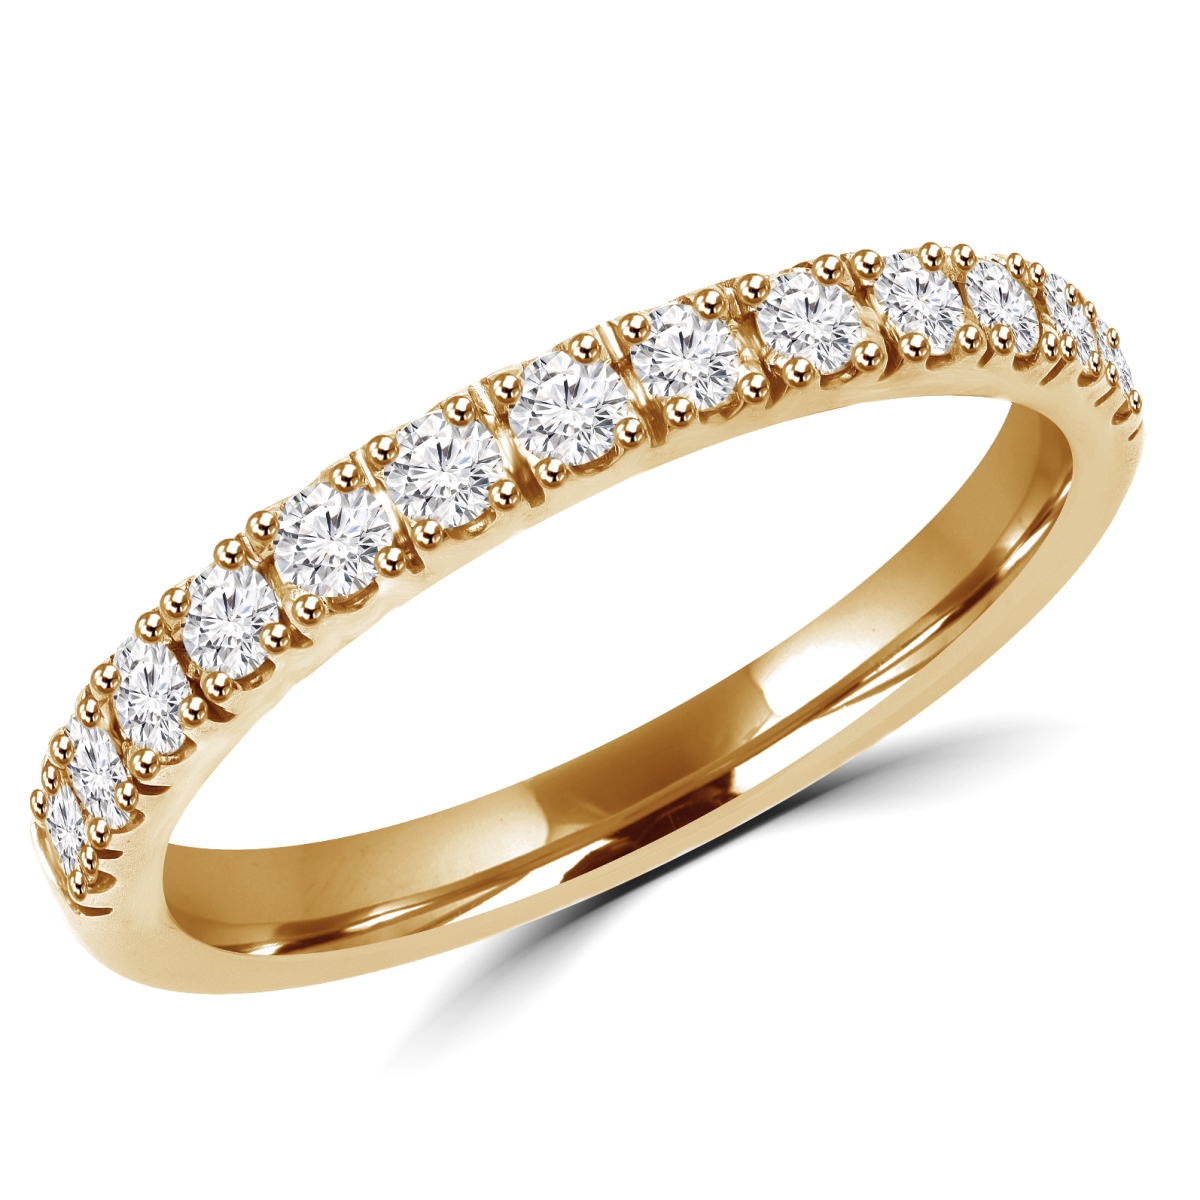 Picture of Majesty Diamonds MD180187-8.75 0.3 CTW Round Diamond Semi-Eternity Wedding Band Ring in 14K Yellow Gold - Size 8.75